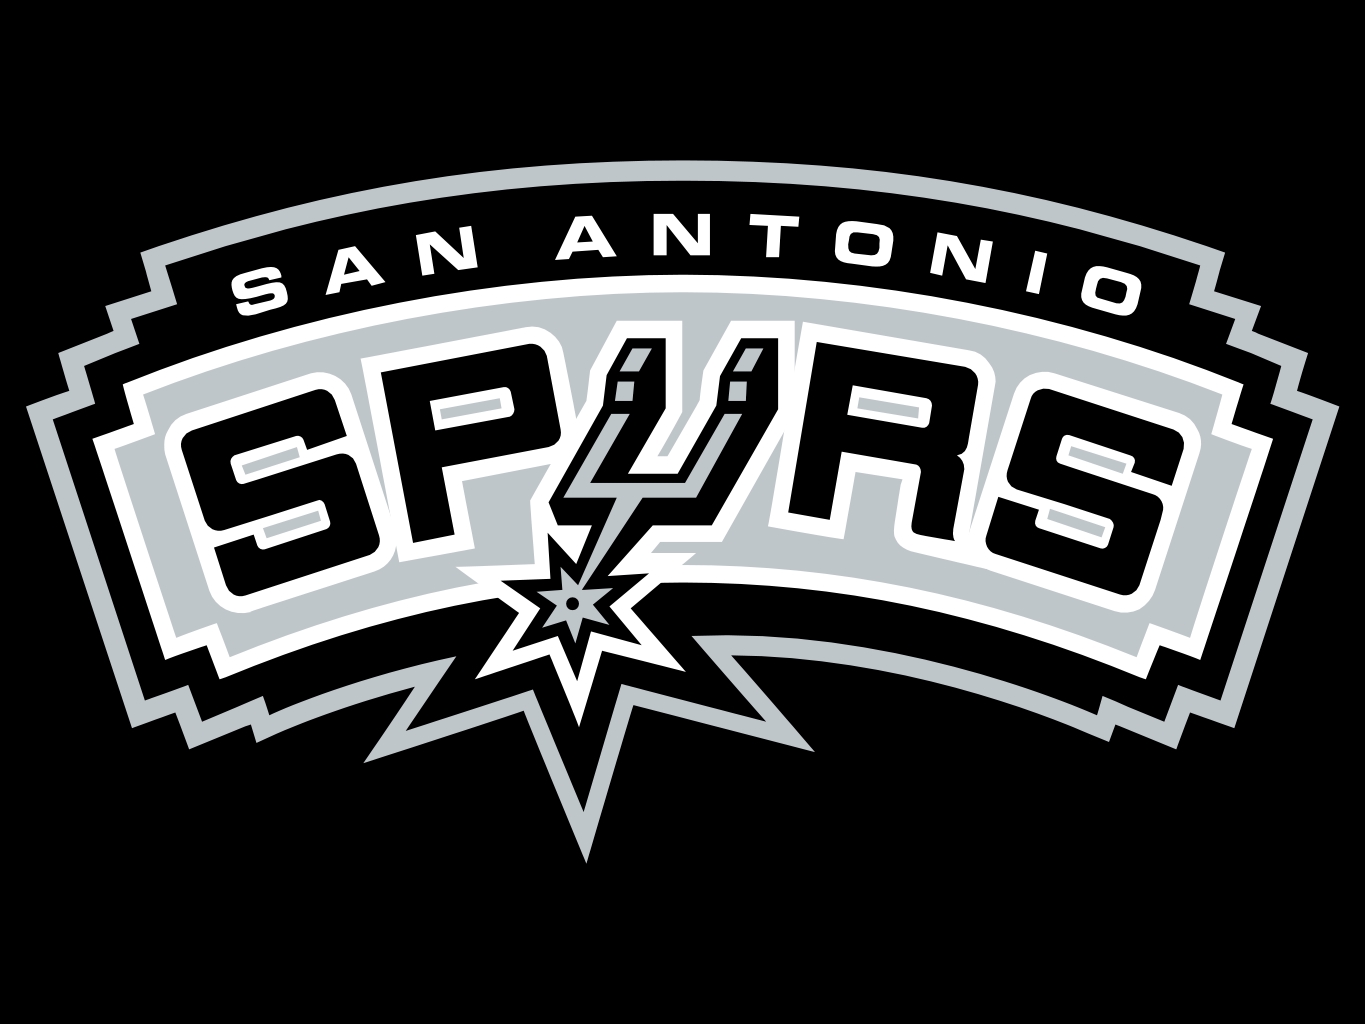 Reserve your San Antonio Spurs Tickets Seats Today